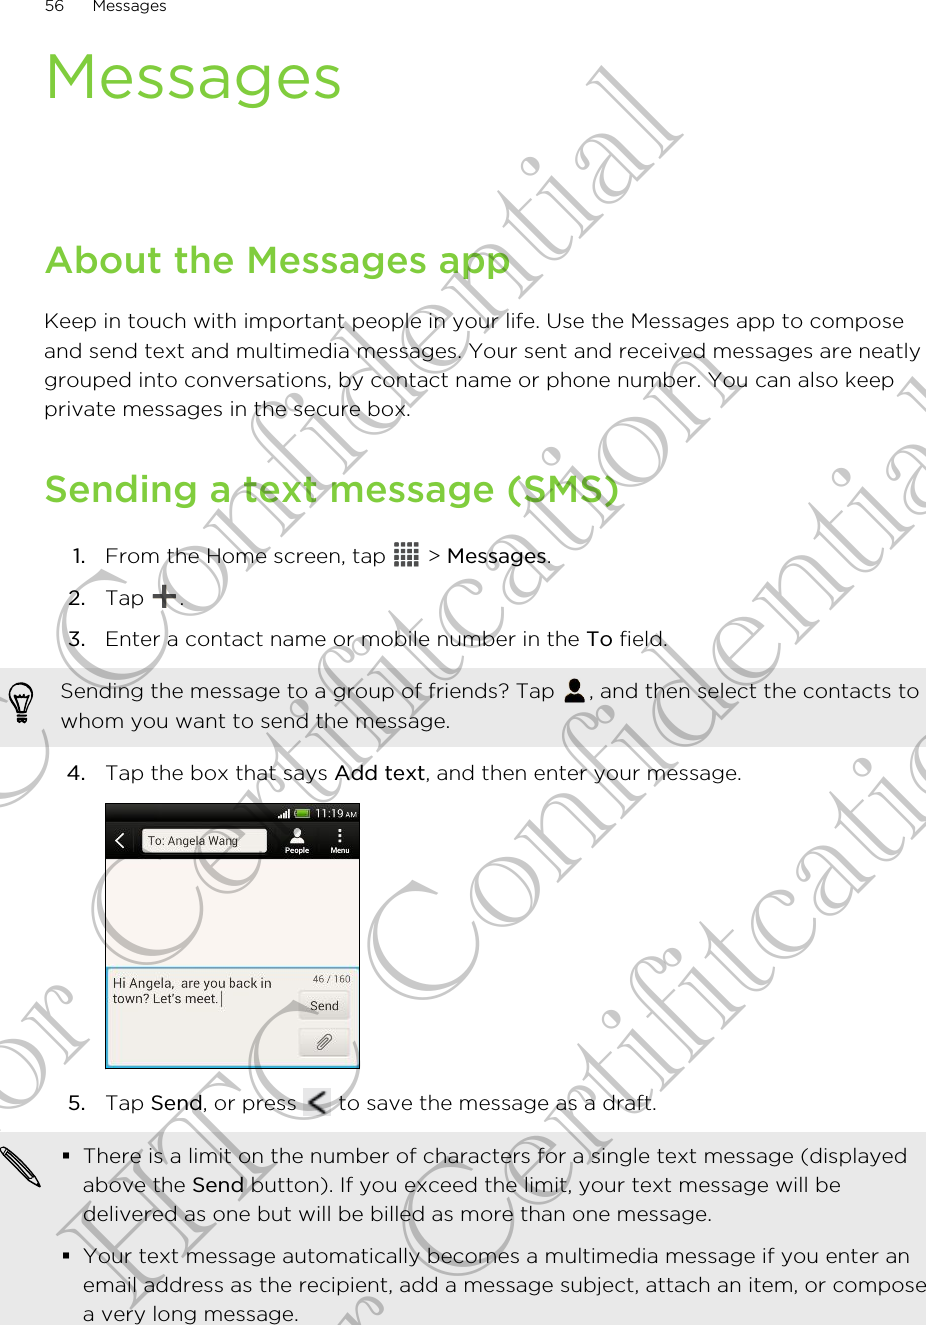 MessagesAbout the Messages appKeep in touch with important people in your life. Use the Messages app to composeand send text and multimedia messages. Your sent and received messages are neatlygrouped into conversations, by contact name or phone number. You can also keepprivate messages in the secure box.Sending a text message (SMS)1. From the Home screen, tap   &gt; Messages.2. Tap  .3. Enter a contact name or mobile number in the To field. Sending the message to a group of friends? Tap  , and then select the contacts towhom you want to send the message.4. Tap the box that says Add text, and then enter your message. 5. Tap Send, or press   to save the message as a draft. §There is a limit on the number of characters for a single text message (displayedabove the Send button). If you exceed the limit, your text message will bedelivered as one but will be billed as more than one message.§Your text message automatically becomes a multimedia message if you enter anemail address as the recipient, add a message subject, attach an item, or composea very long message.56 MessagesHTC Confidential for Certifitcation HTC Confidential for Certifitcation